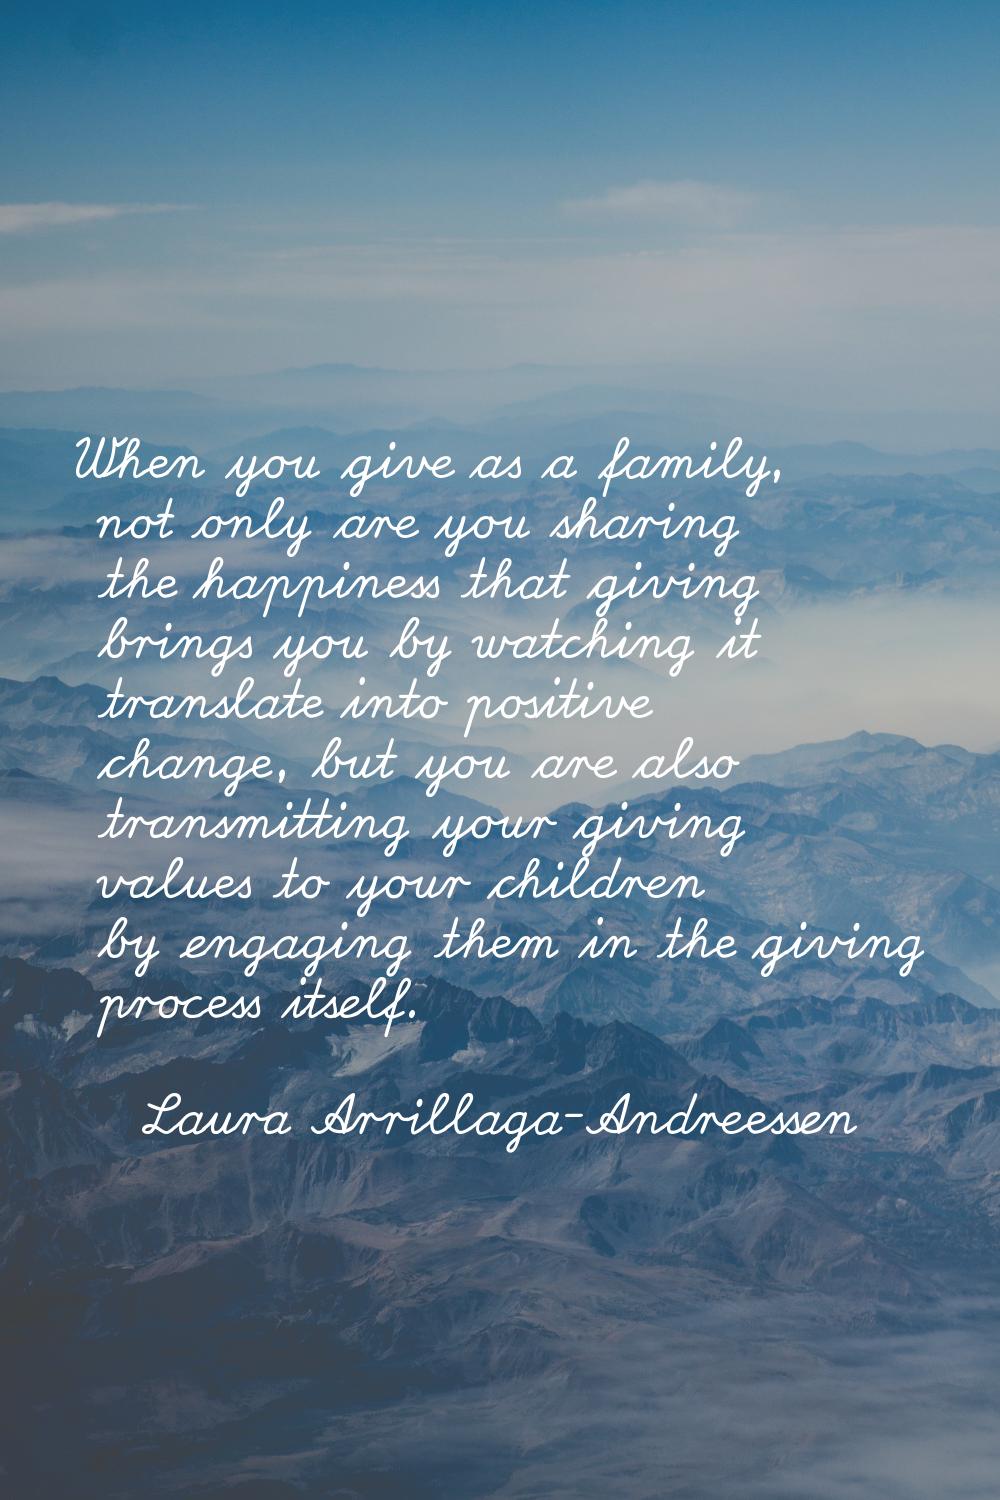 When you give as a family, not only are you sharing the happiness that giving brings you by watchin